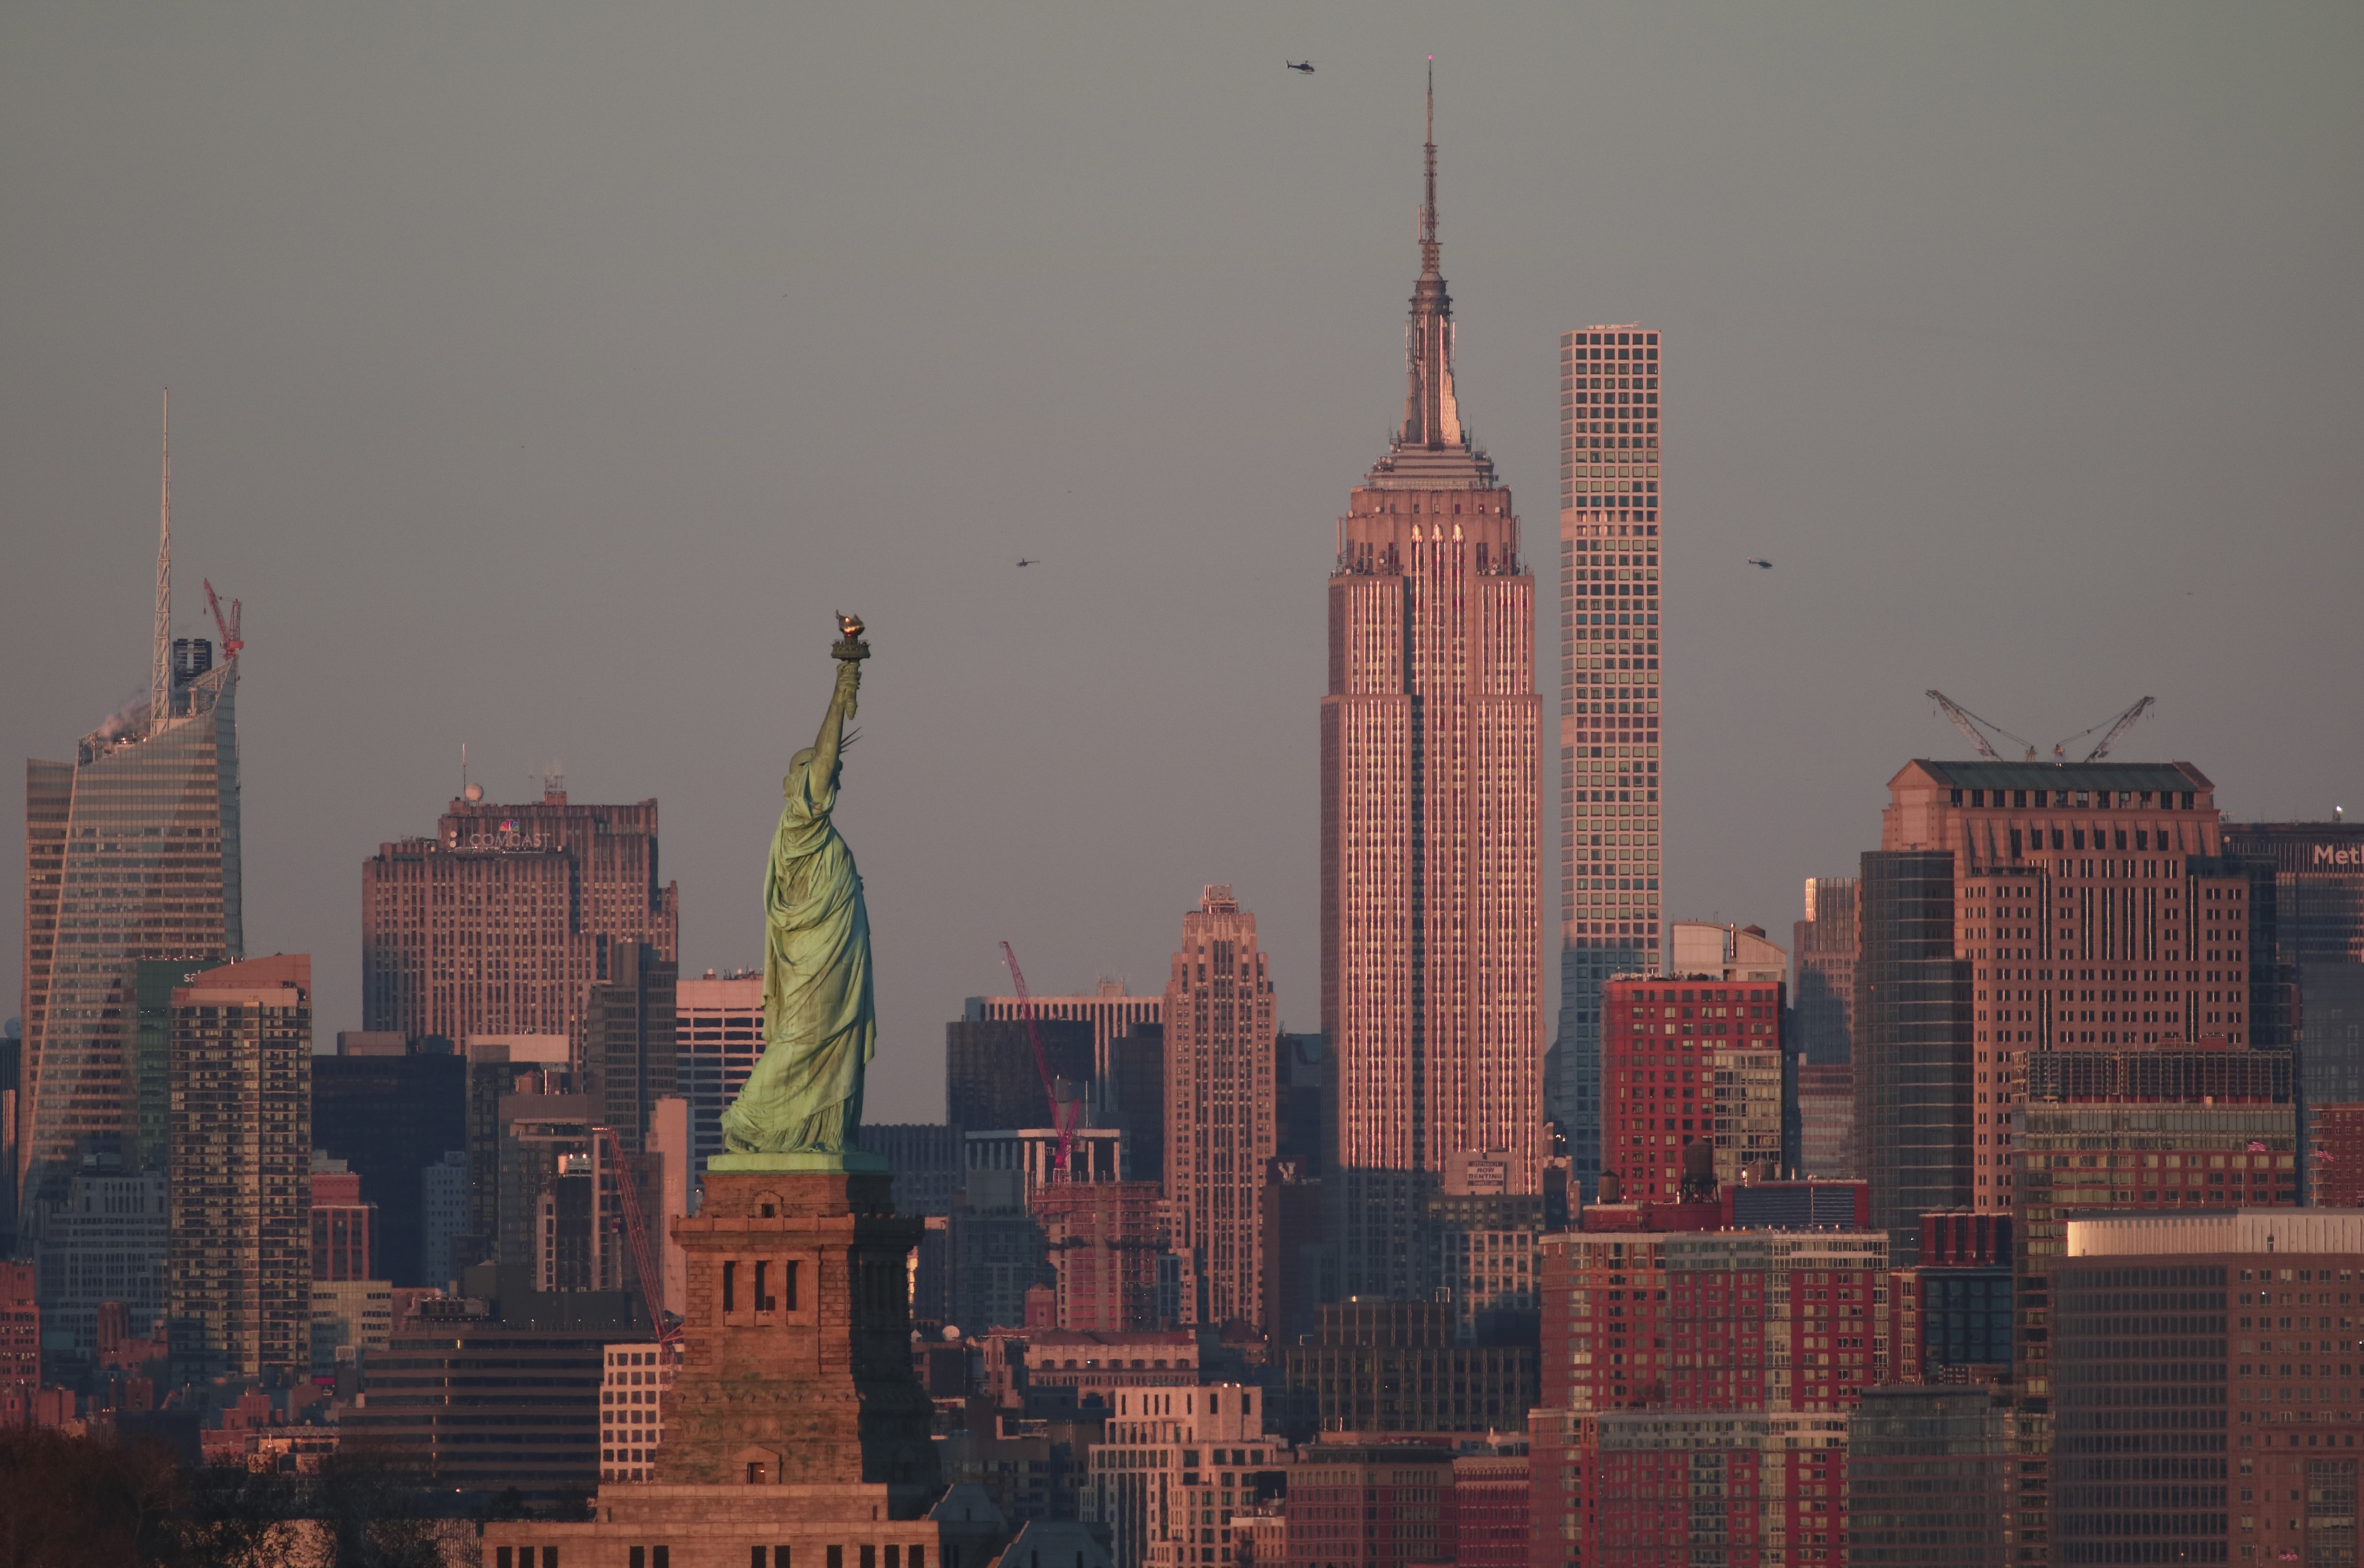 The sun sets on the Empire State Building and Statue of Liberty in New York City.